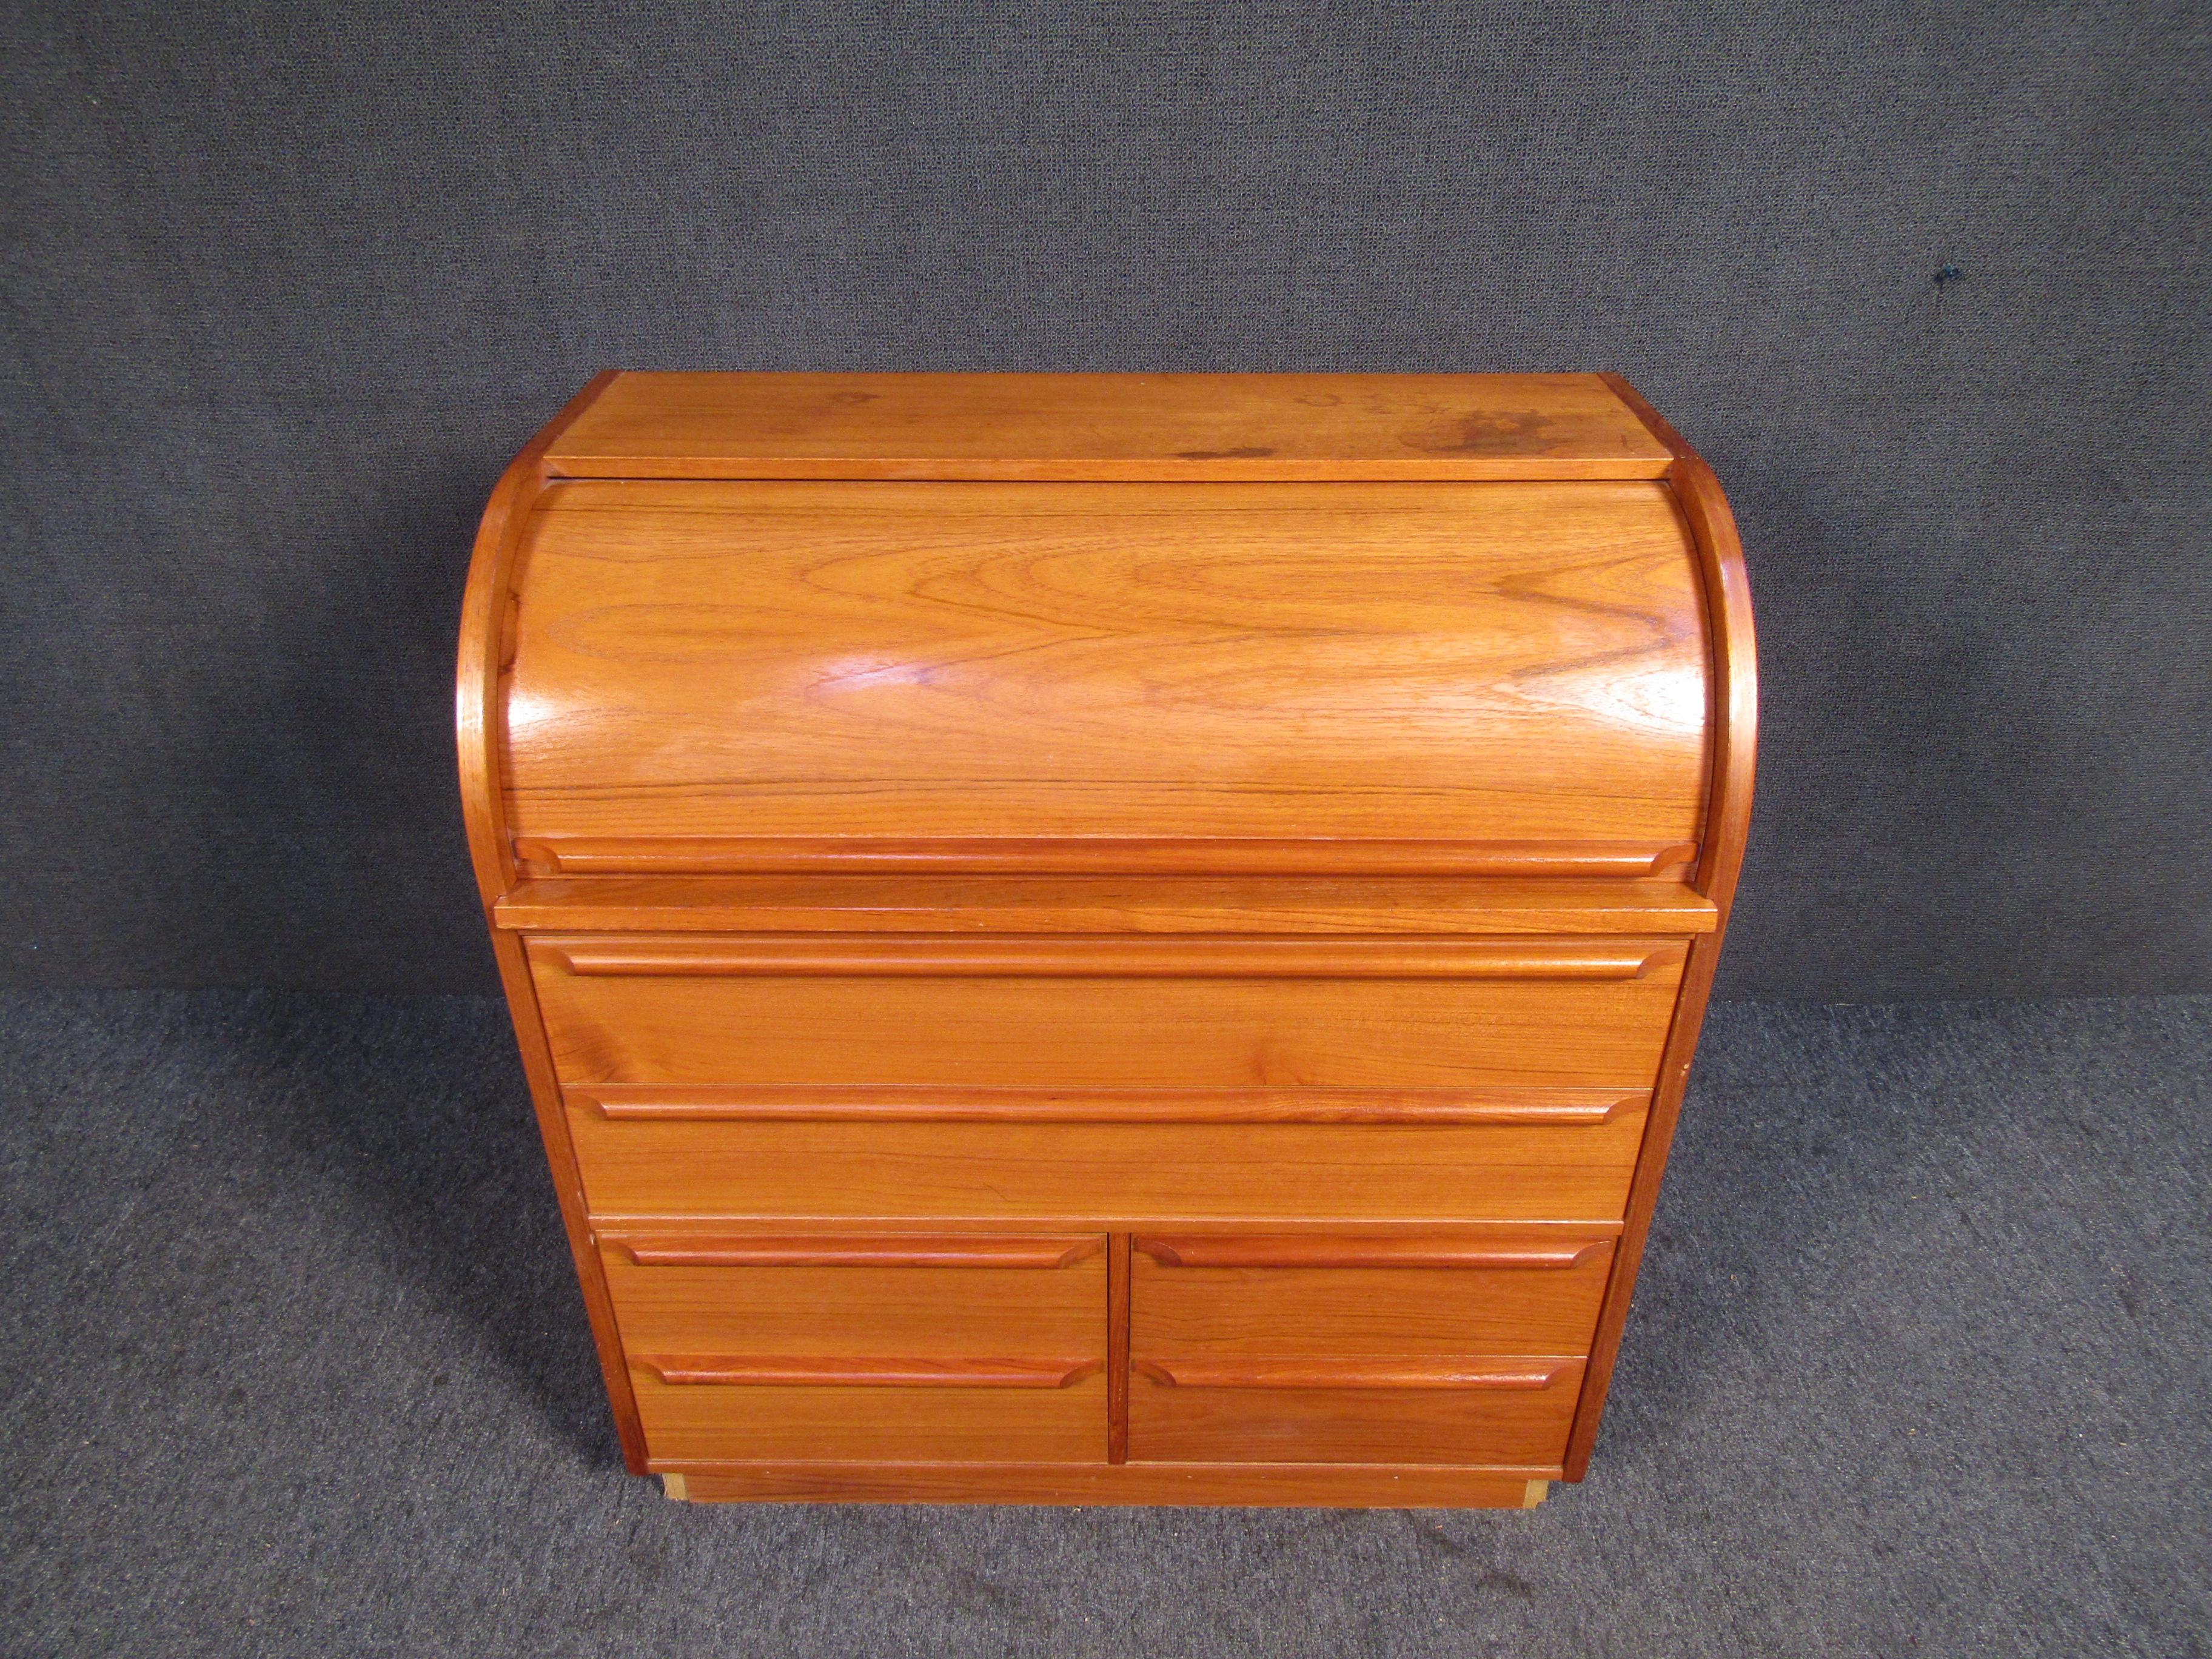 With an interesting compact shape and plenty of storage, this Mid-Century Modern rolltop desk is unique in size and design. A large amount of drawer space allows this vintage piece to be used in multiple ways. Please confirm item location with